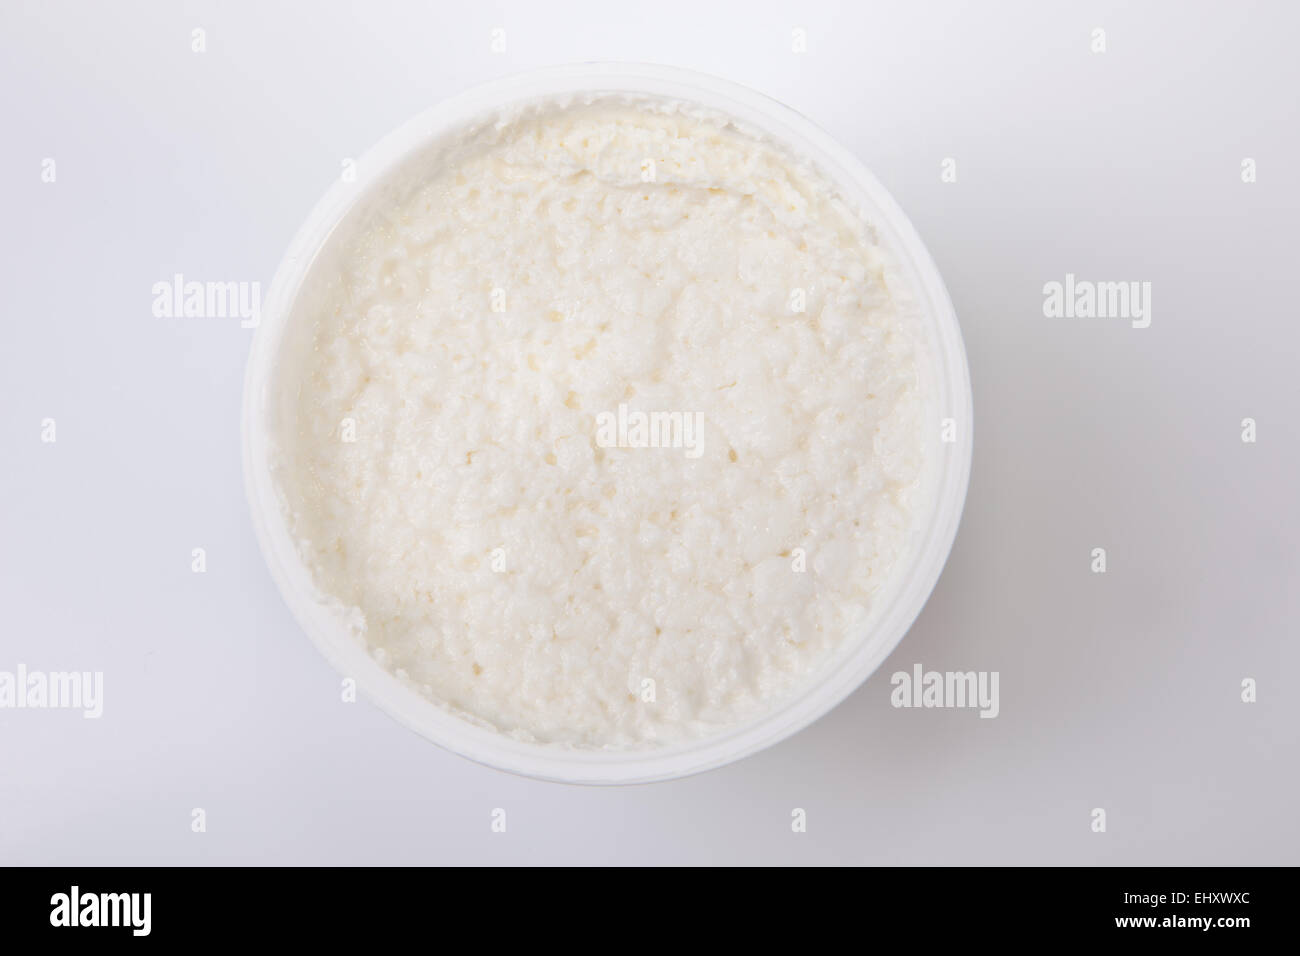 Granulated cottage cheese its plastic bowl. Isolated over white background Stock Photo